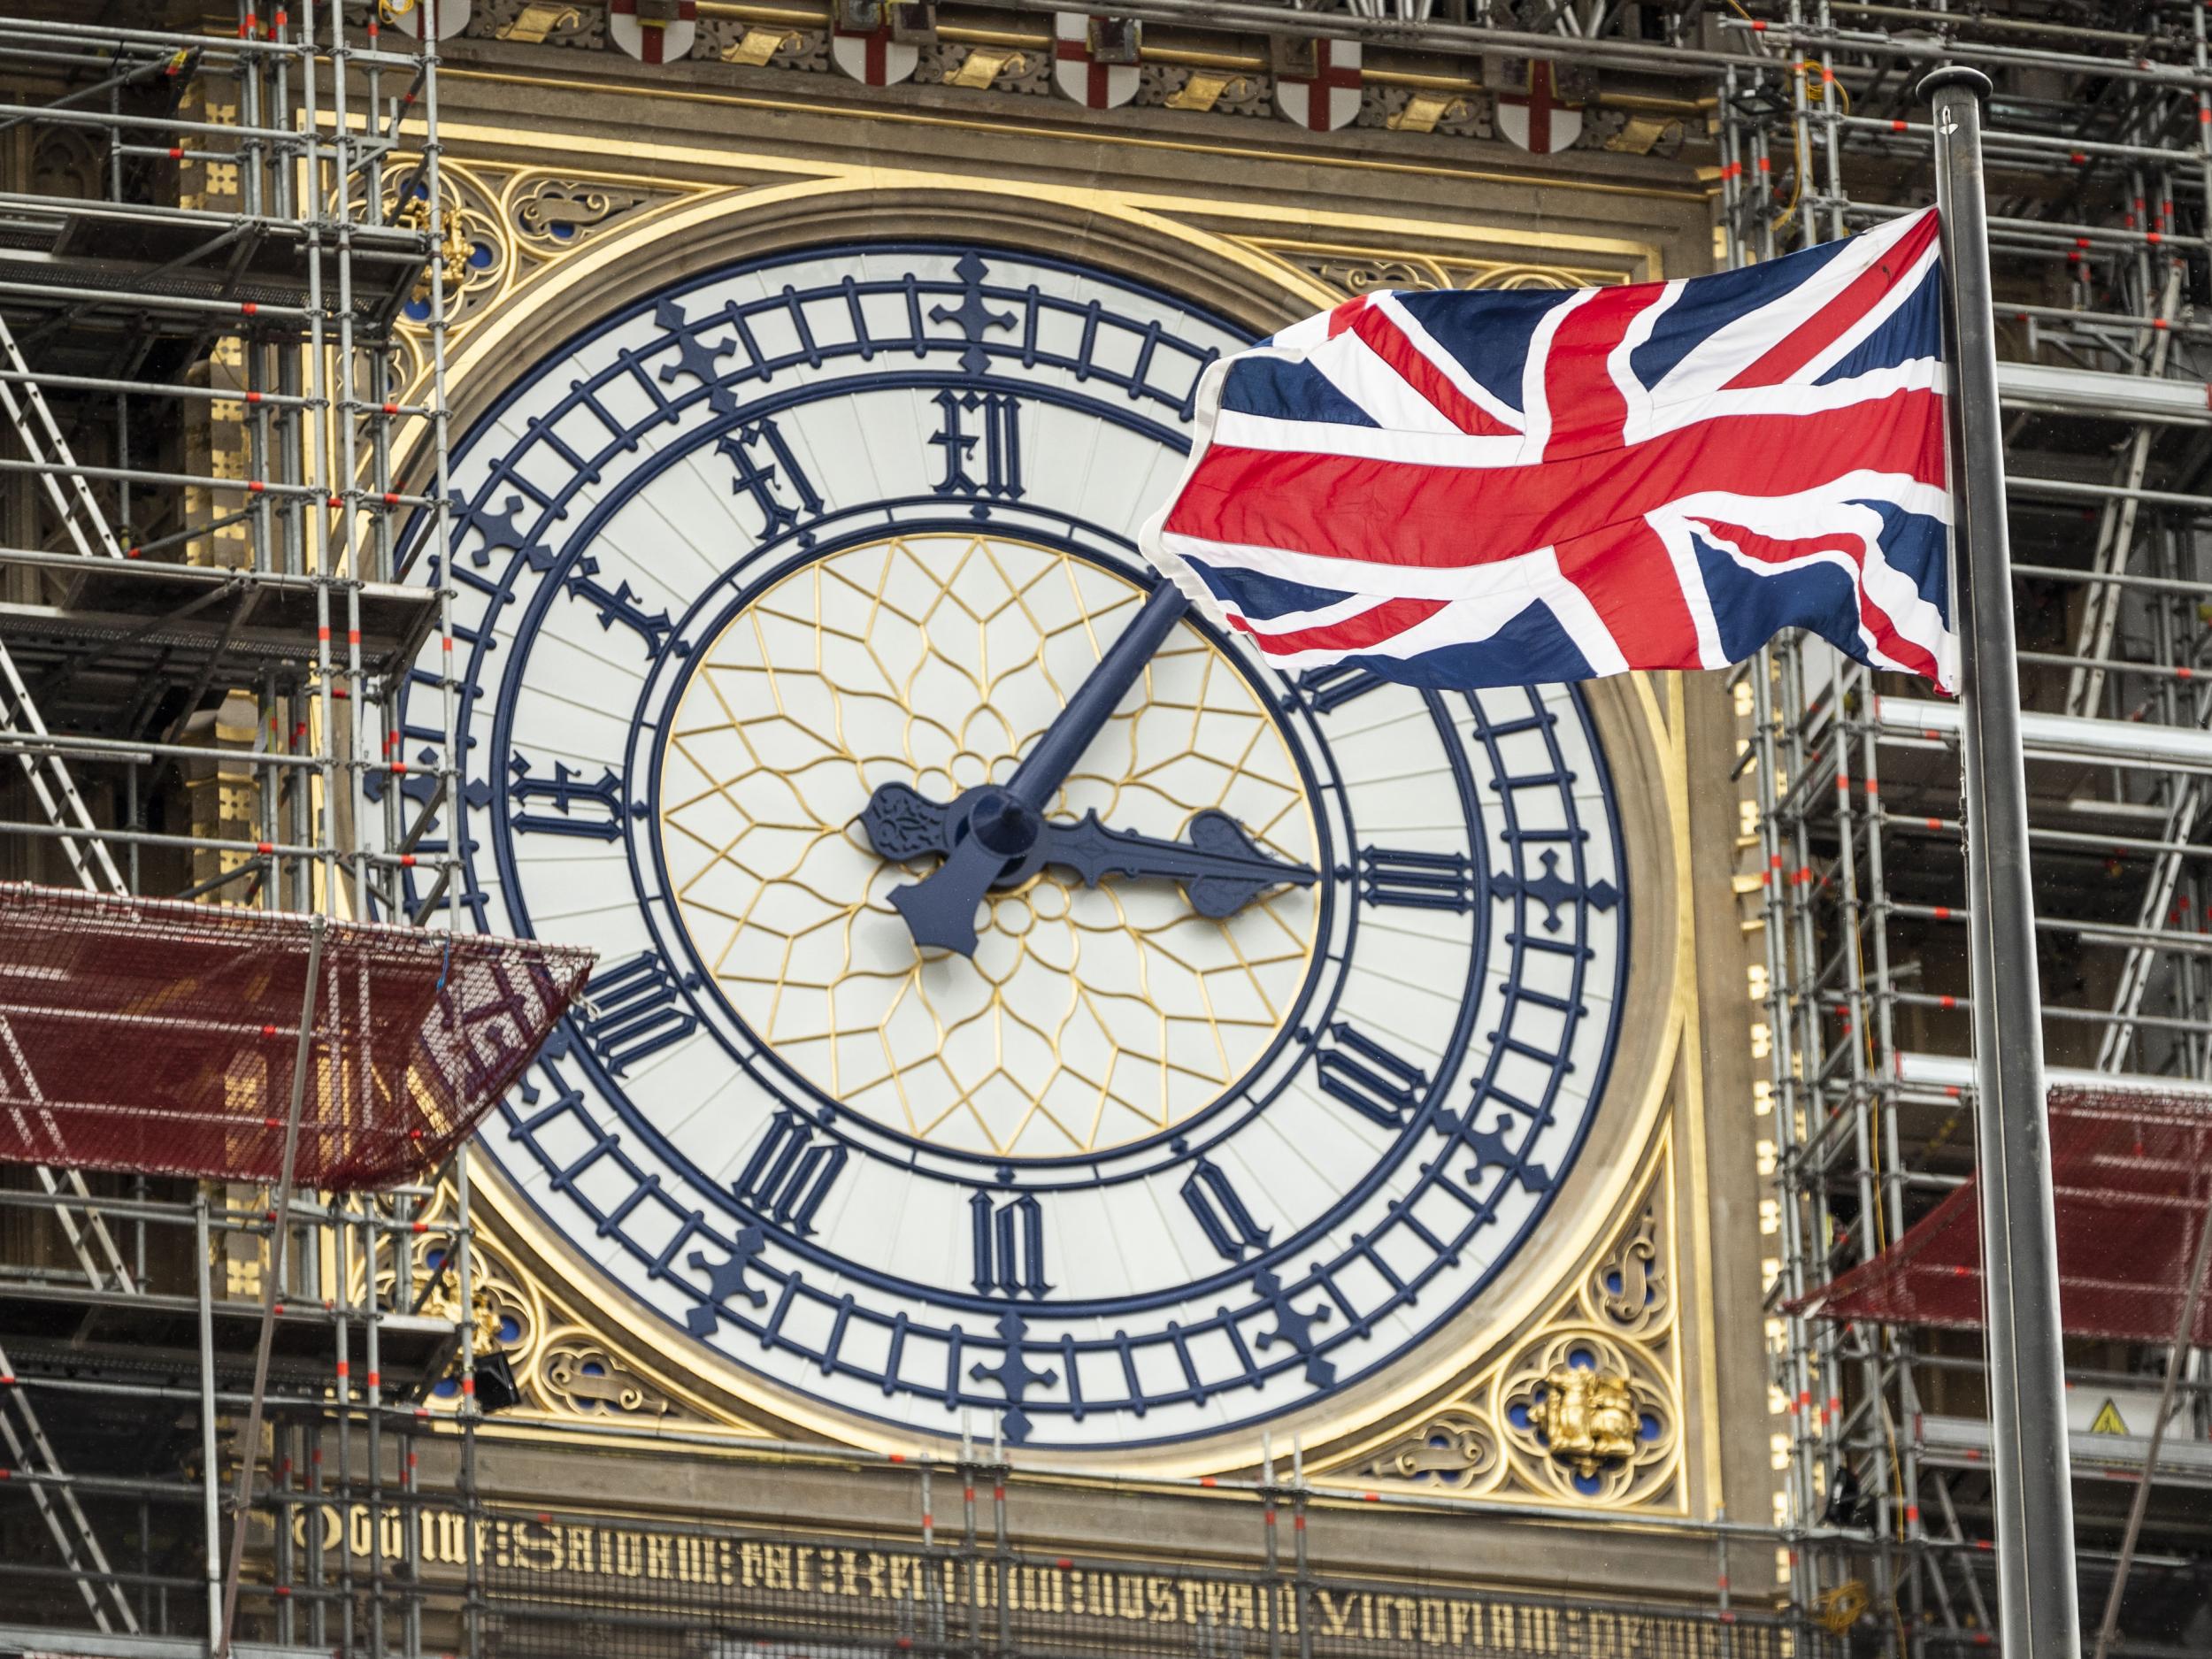 Big Ben will ring to mark New Year for first time since restored blue clock face revealed